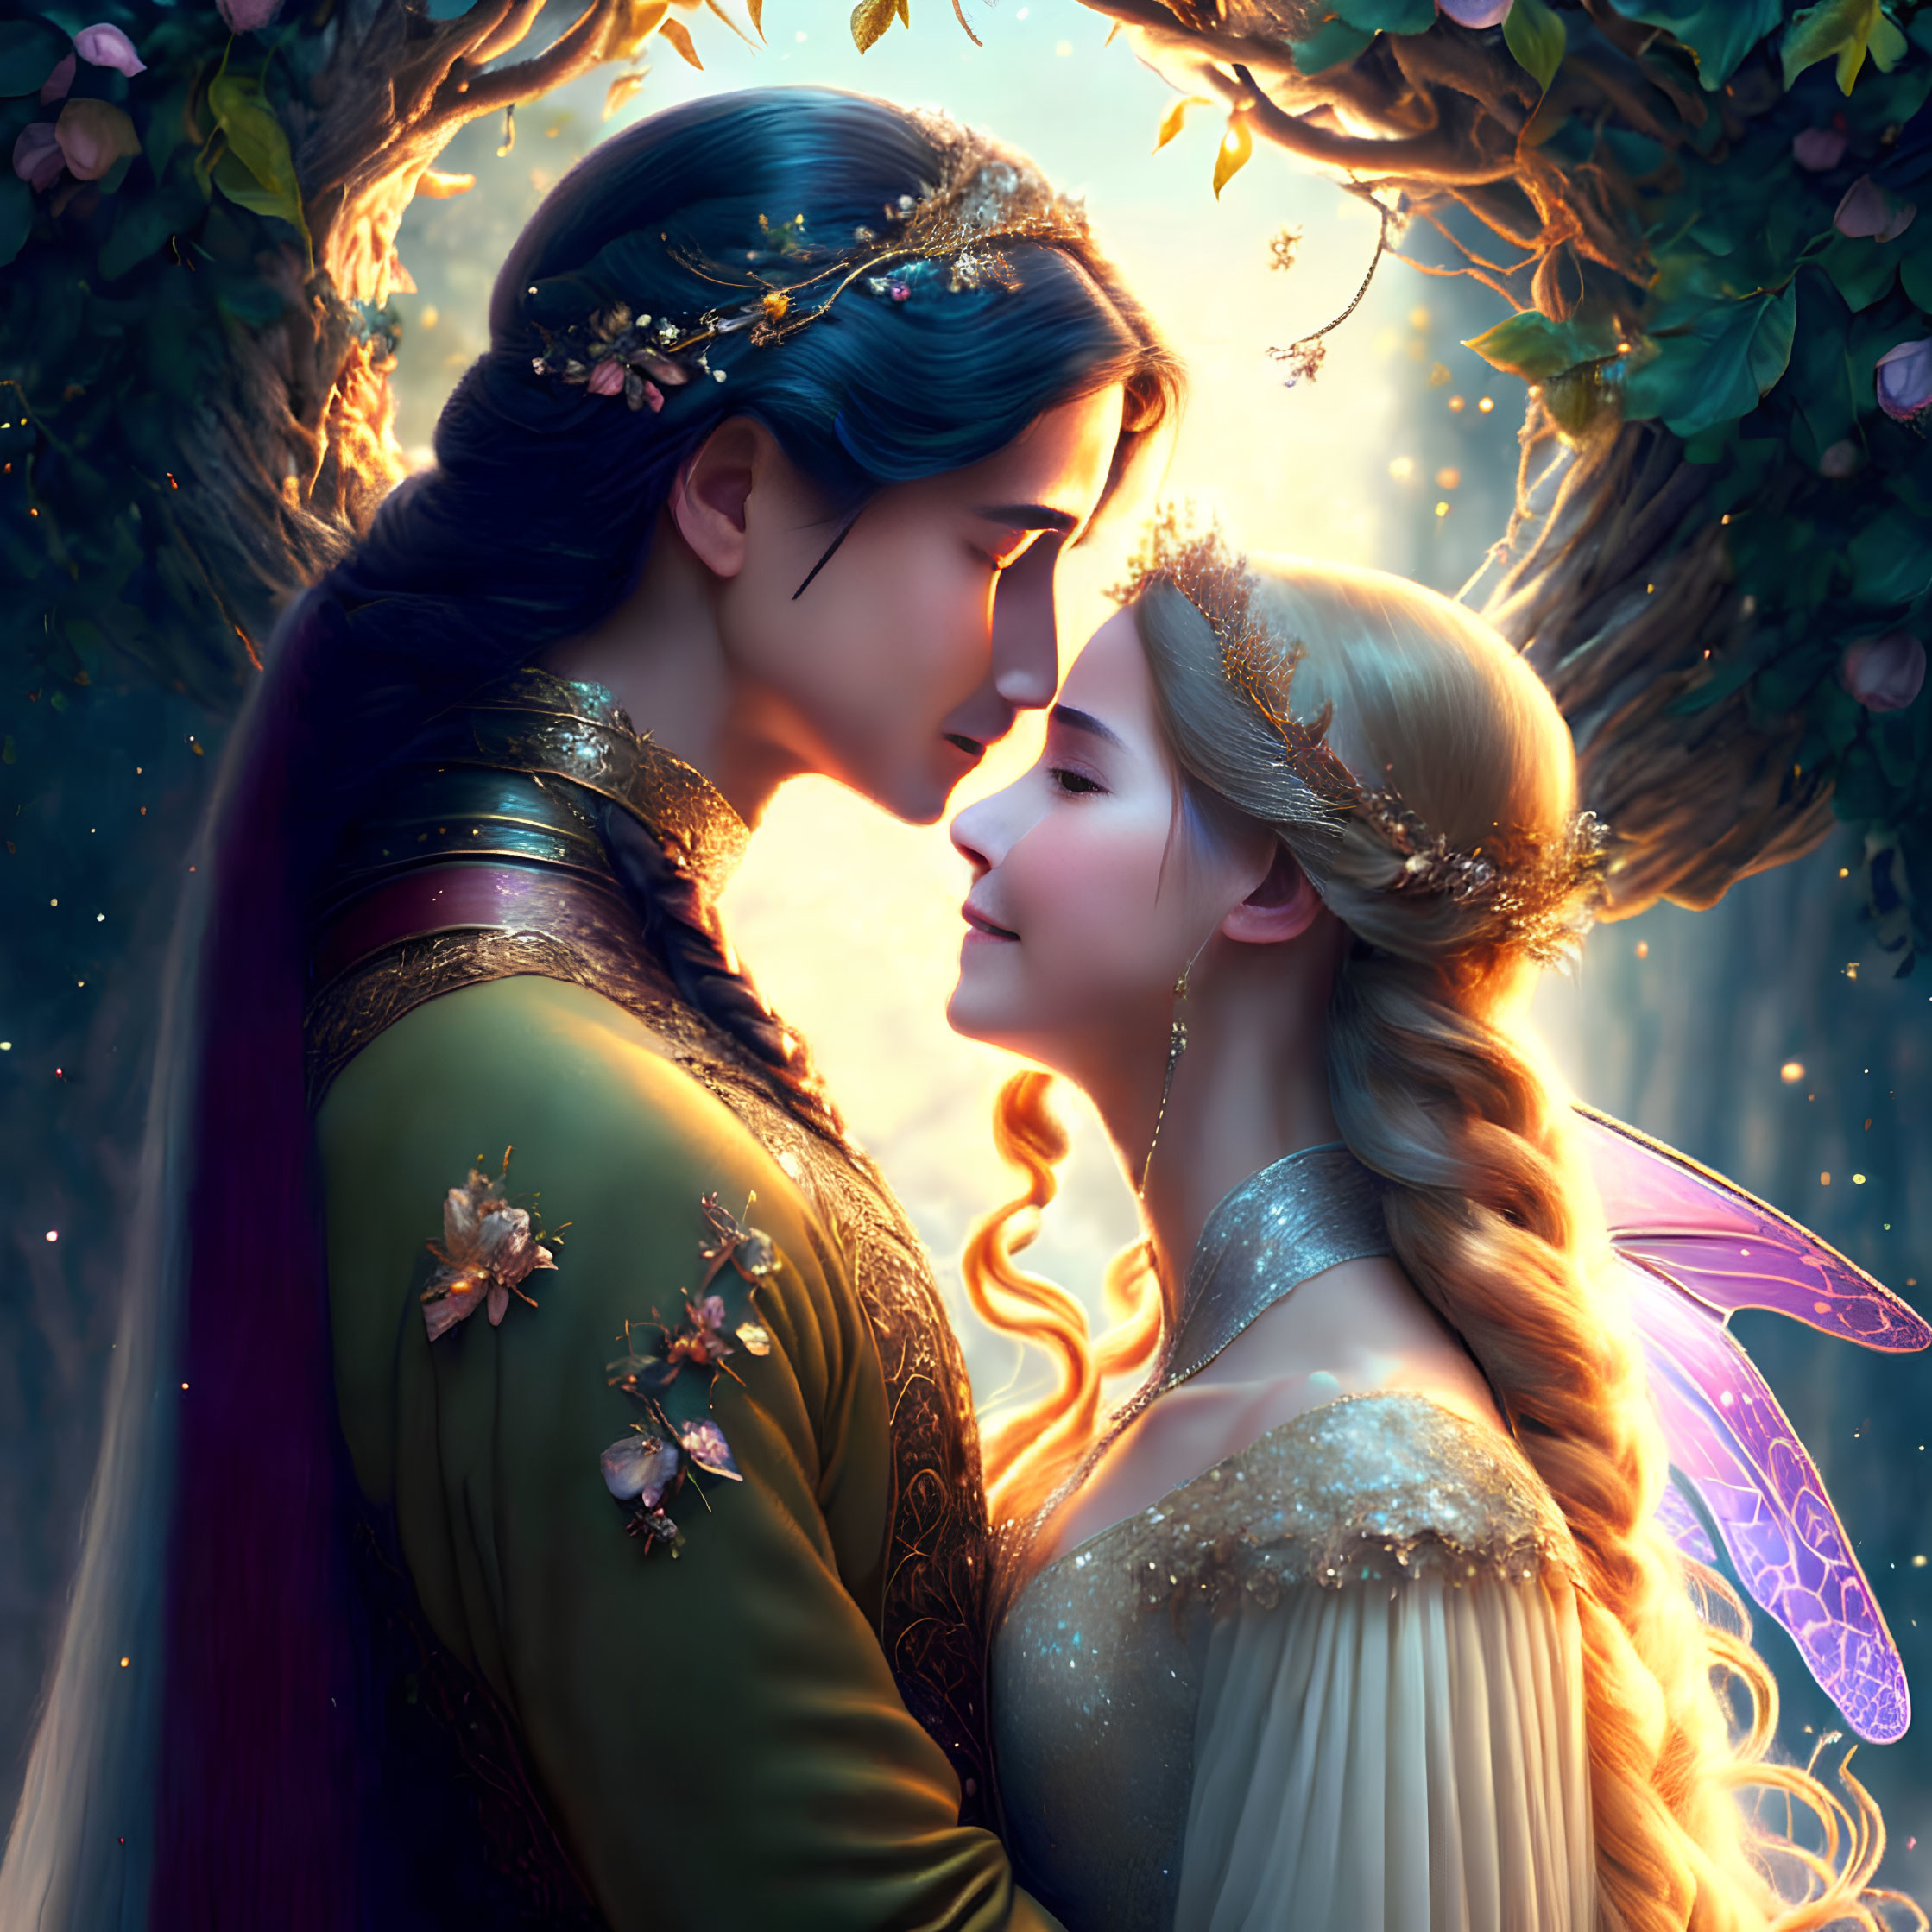 Fantasy digital illustration of two characters kissing under floral arch